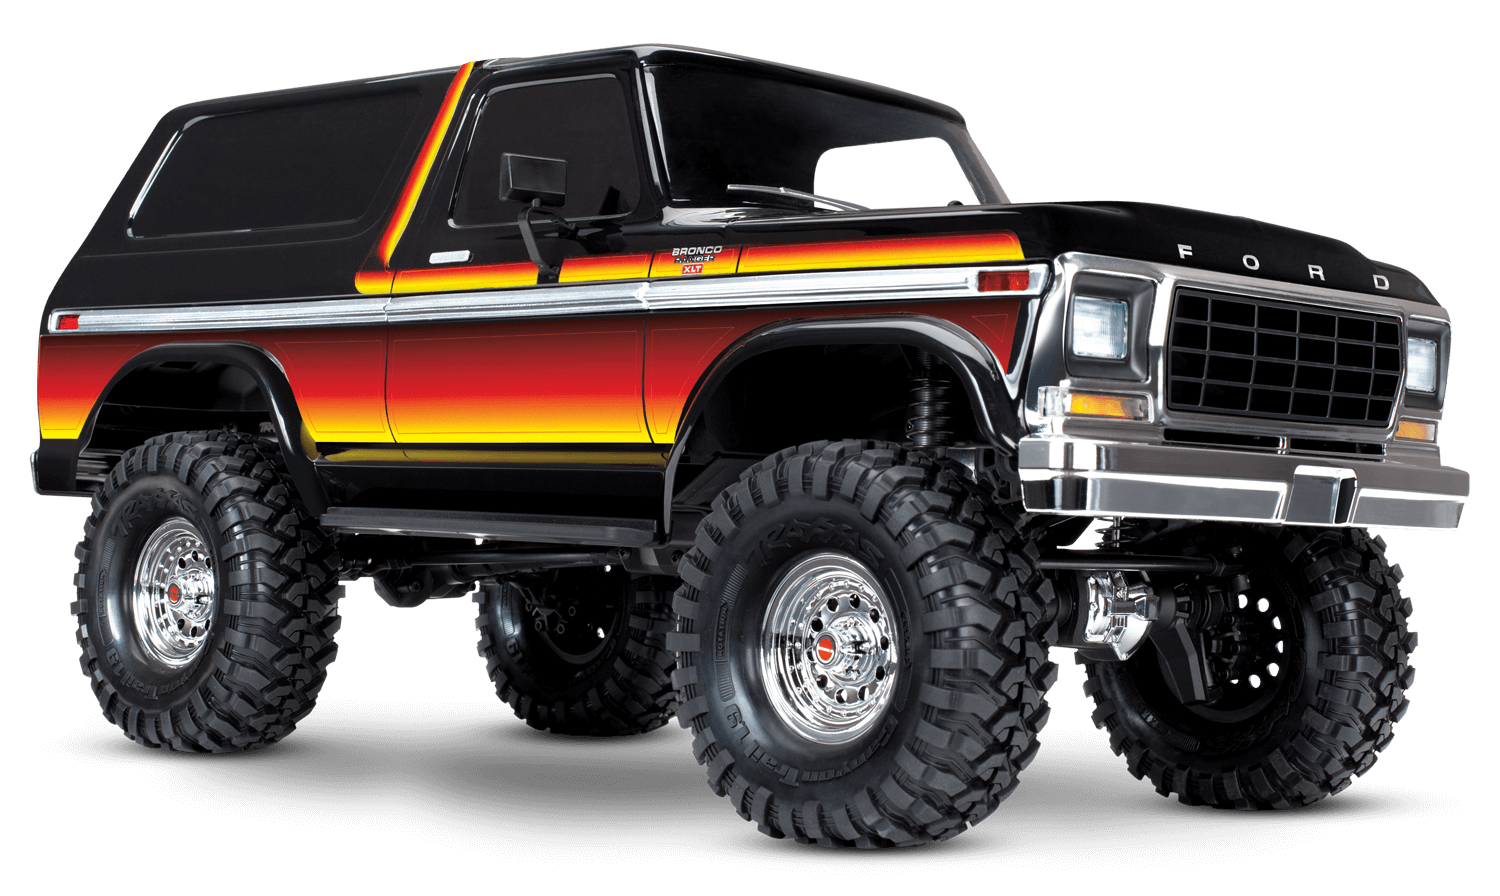 1979 Ford Bronco with Sunset paint scheme